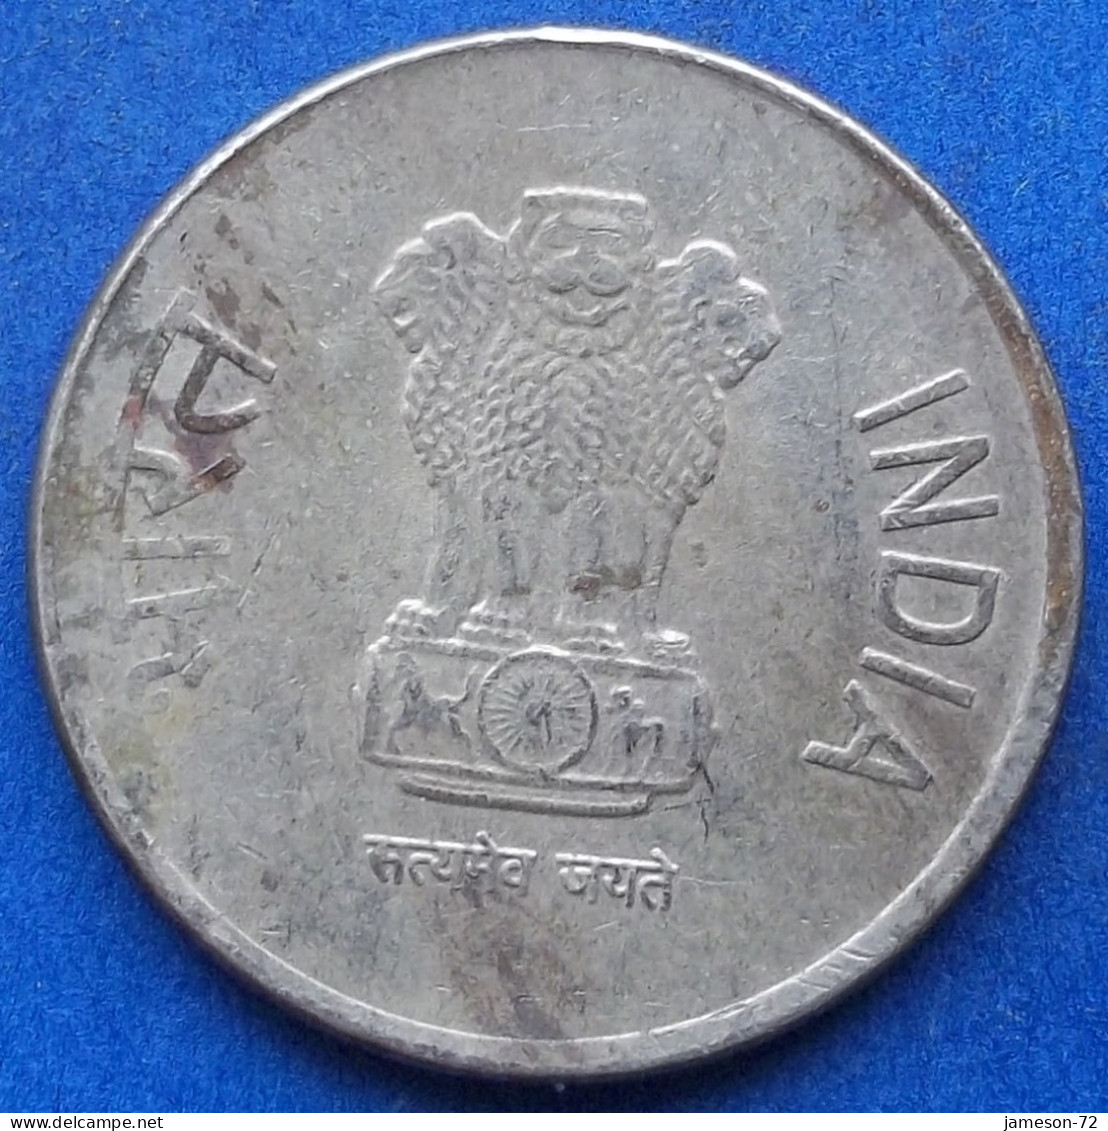 INDIA - 5 Rupees 2017 "Lotus Flowers" KM# 399.1 Republic Decimal Coinage (1957) - Edelweiss Coins - Georgië